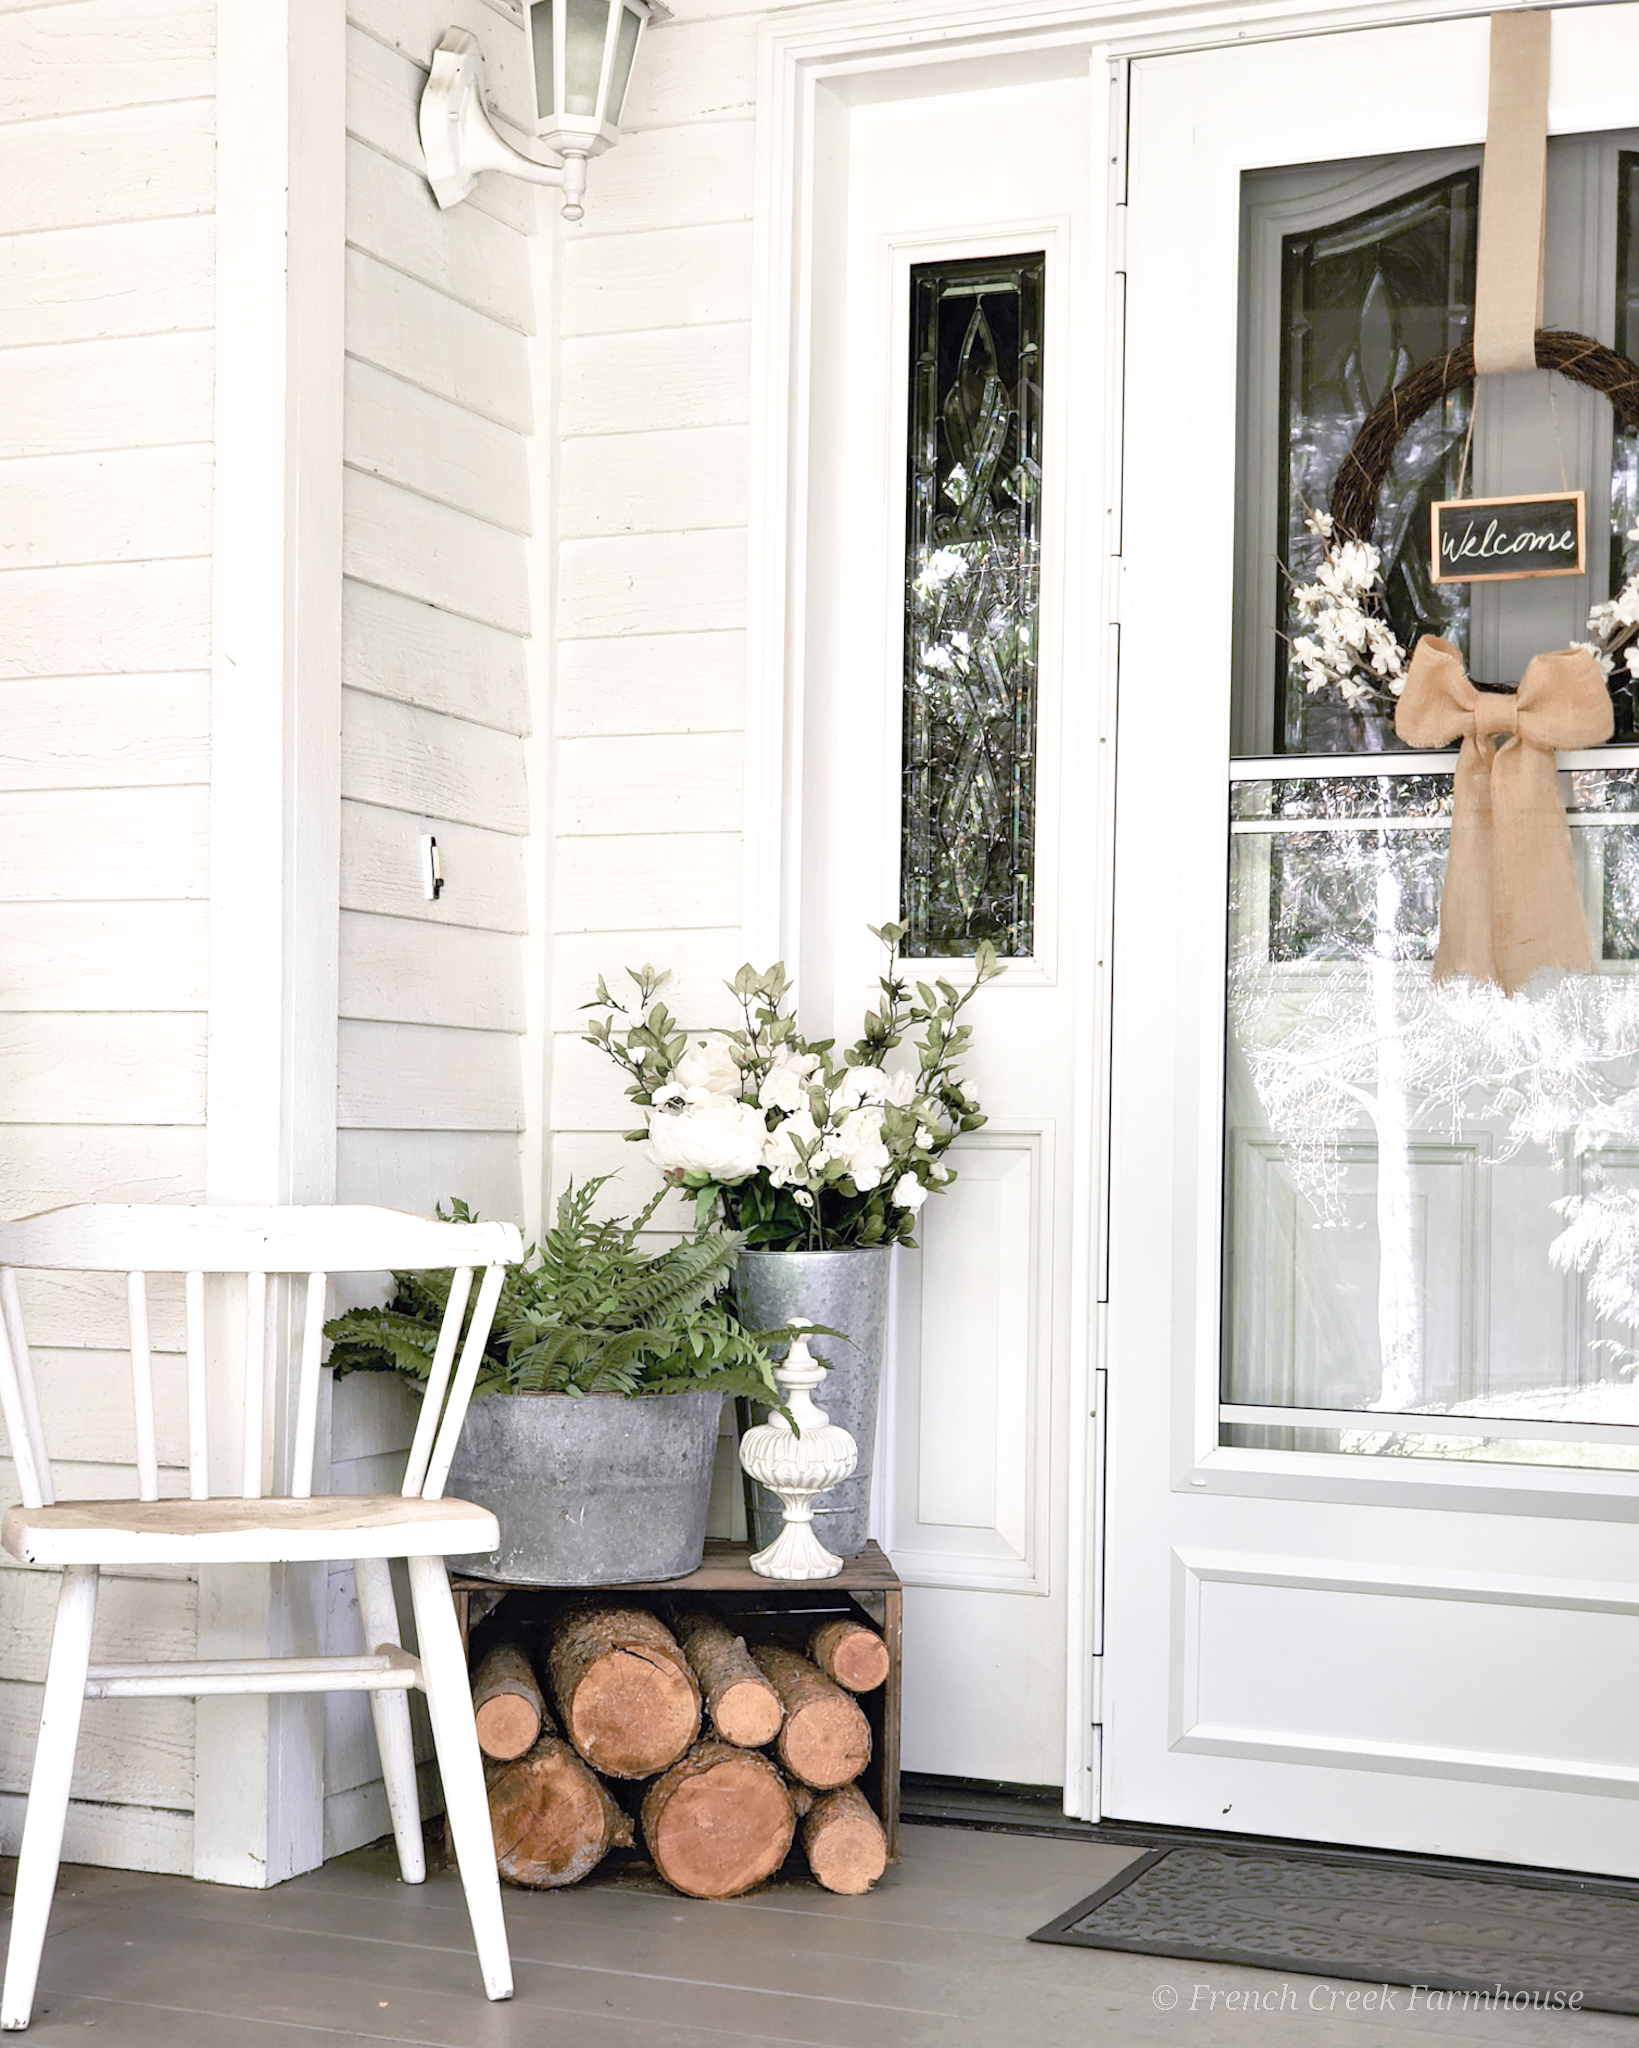 Classic farmhouse touches with loads of blooms are great inspiration for spring decor